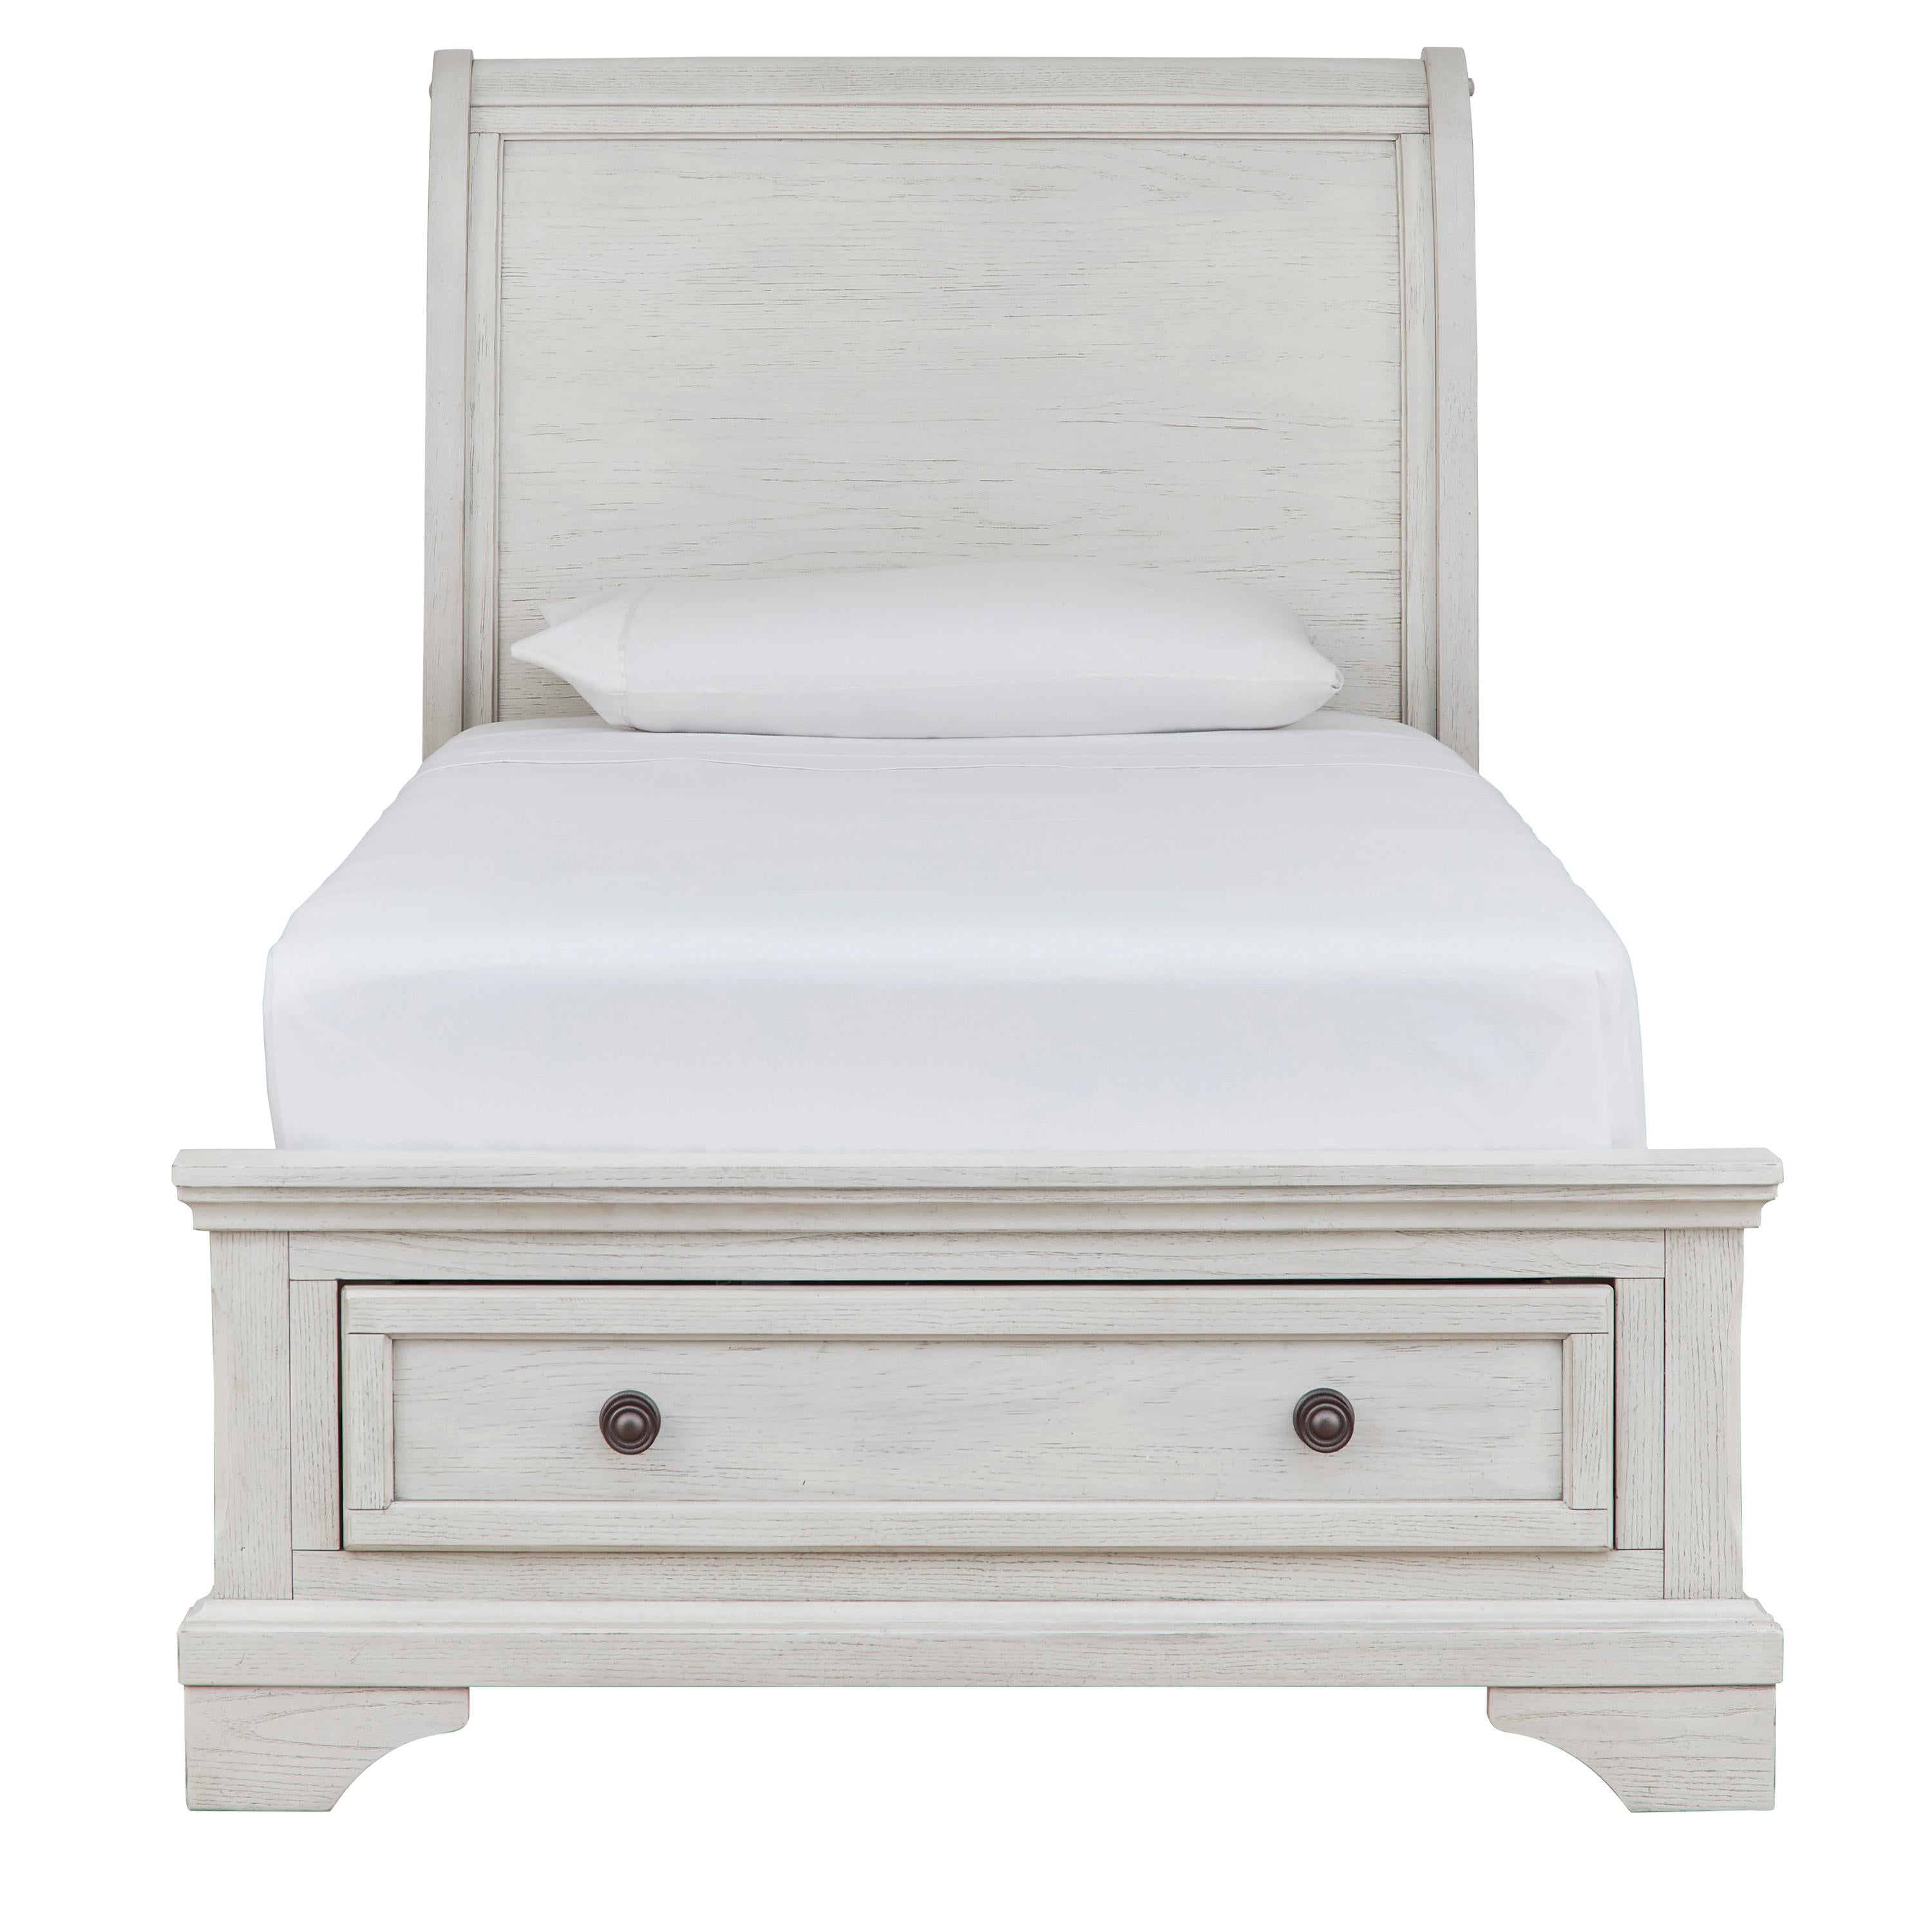 Signature Design by Ashley Kids Beds Bed B742-53/B742-52S/B742-183 IMAGE 2